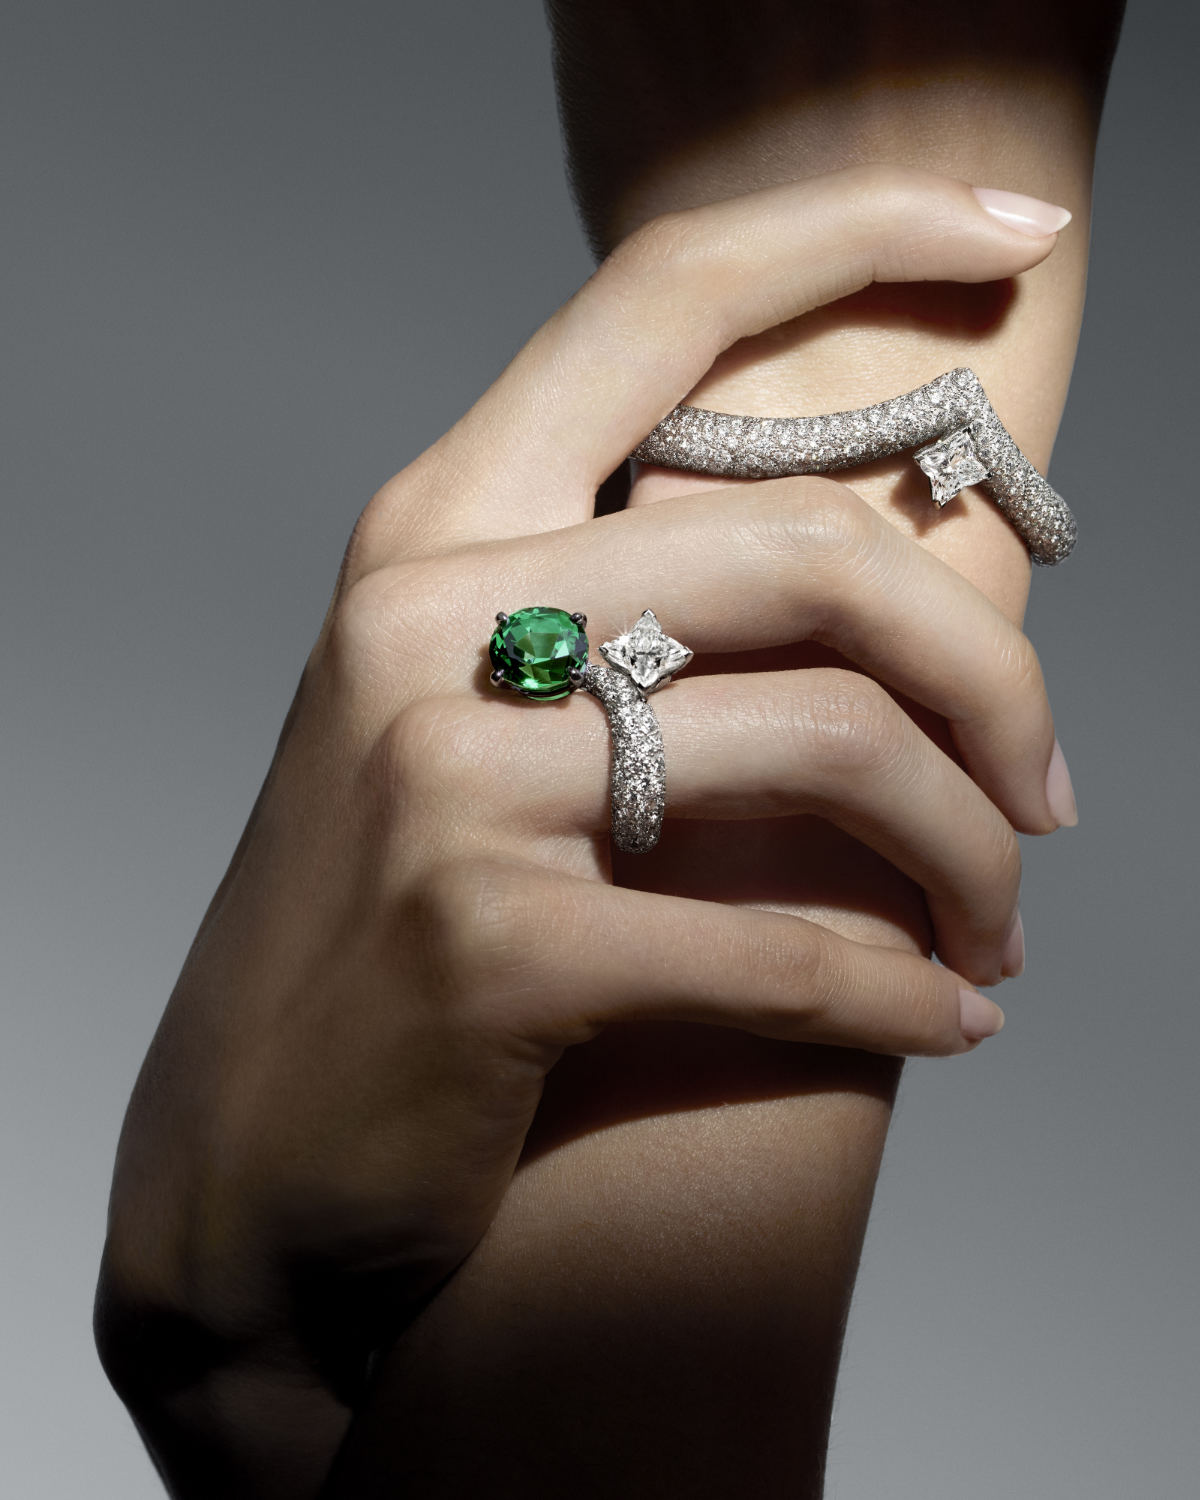 Louis Vuitton Presents Its New 2022 High Jewellery Collection: Spirit